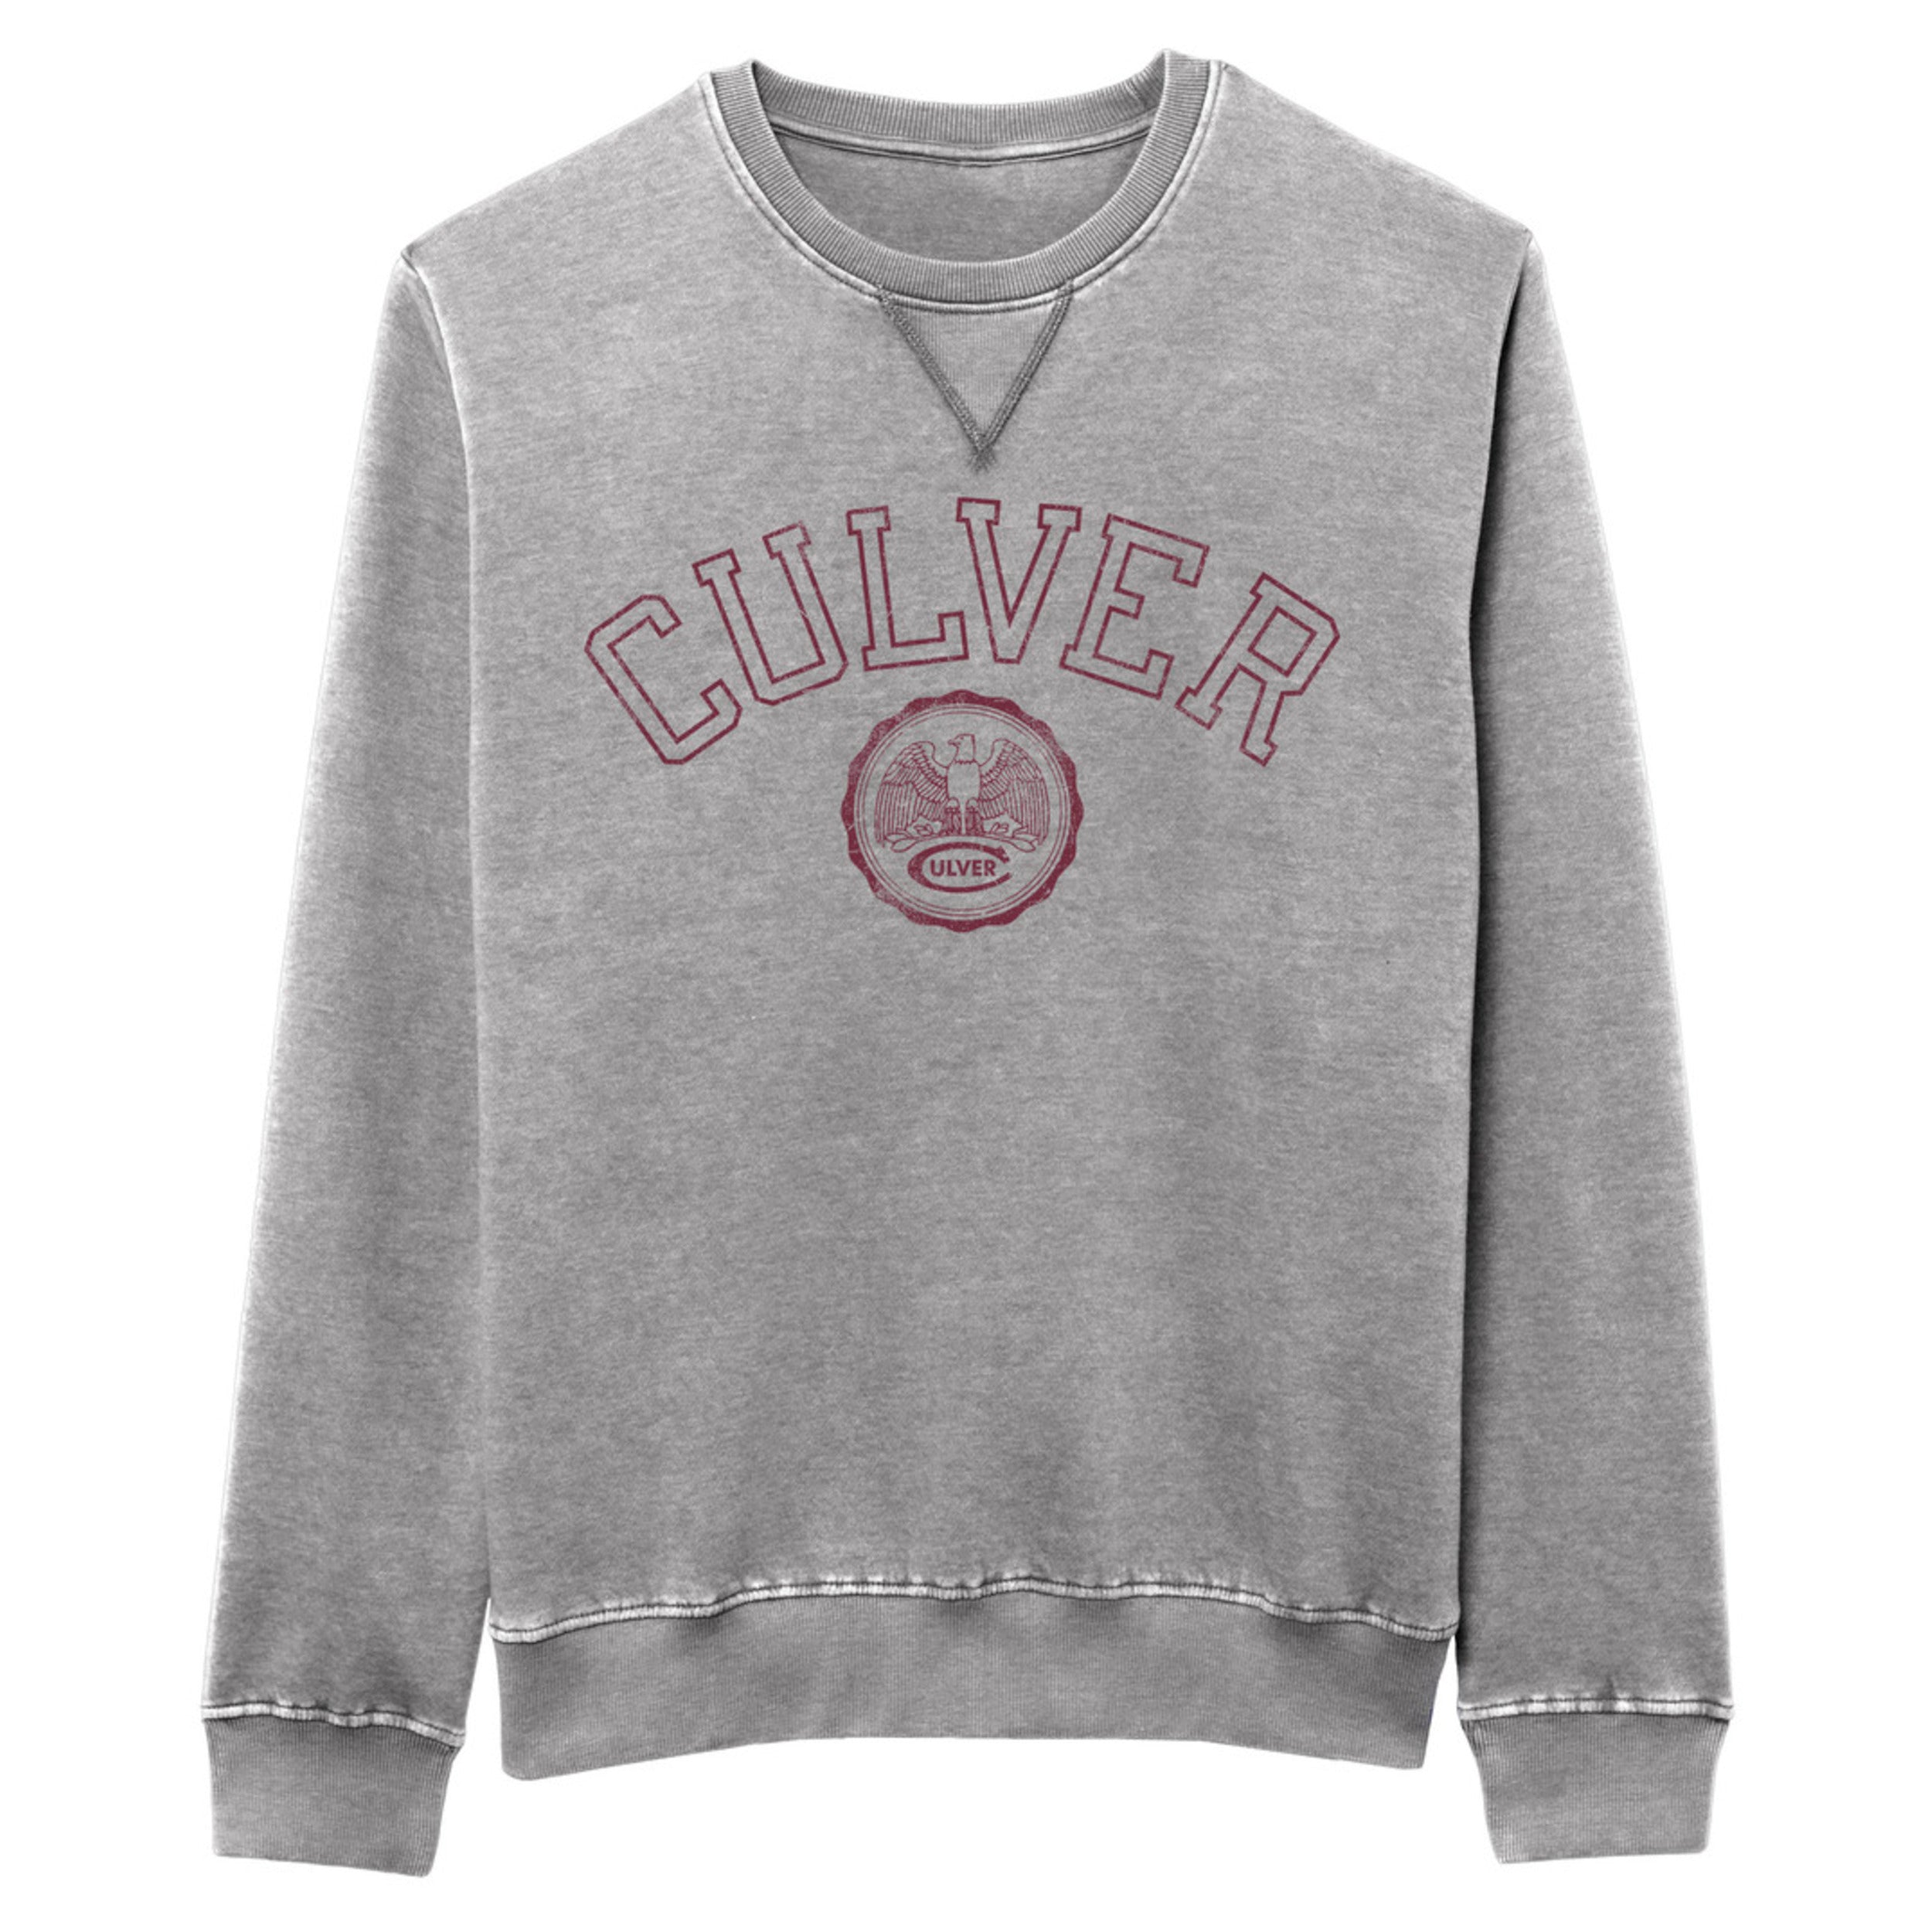 Culver Seal Weathered Fleece Crew - Smoked Pearl